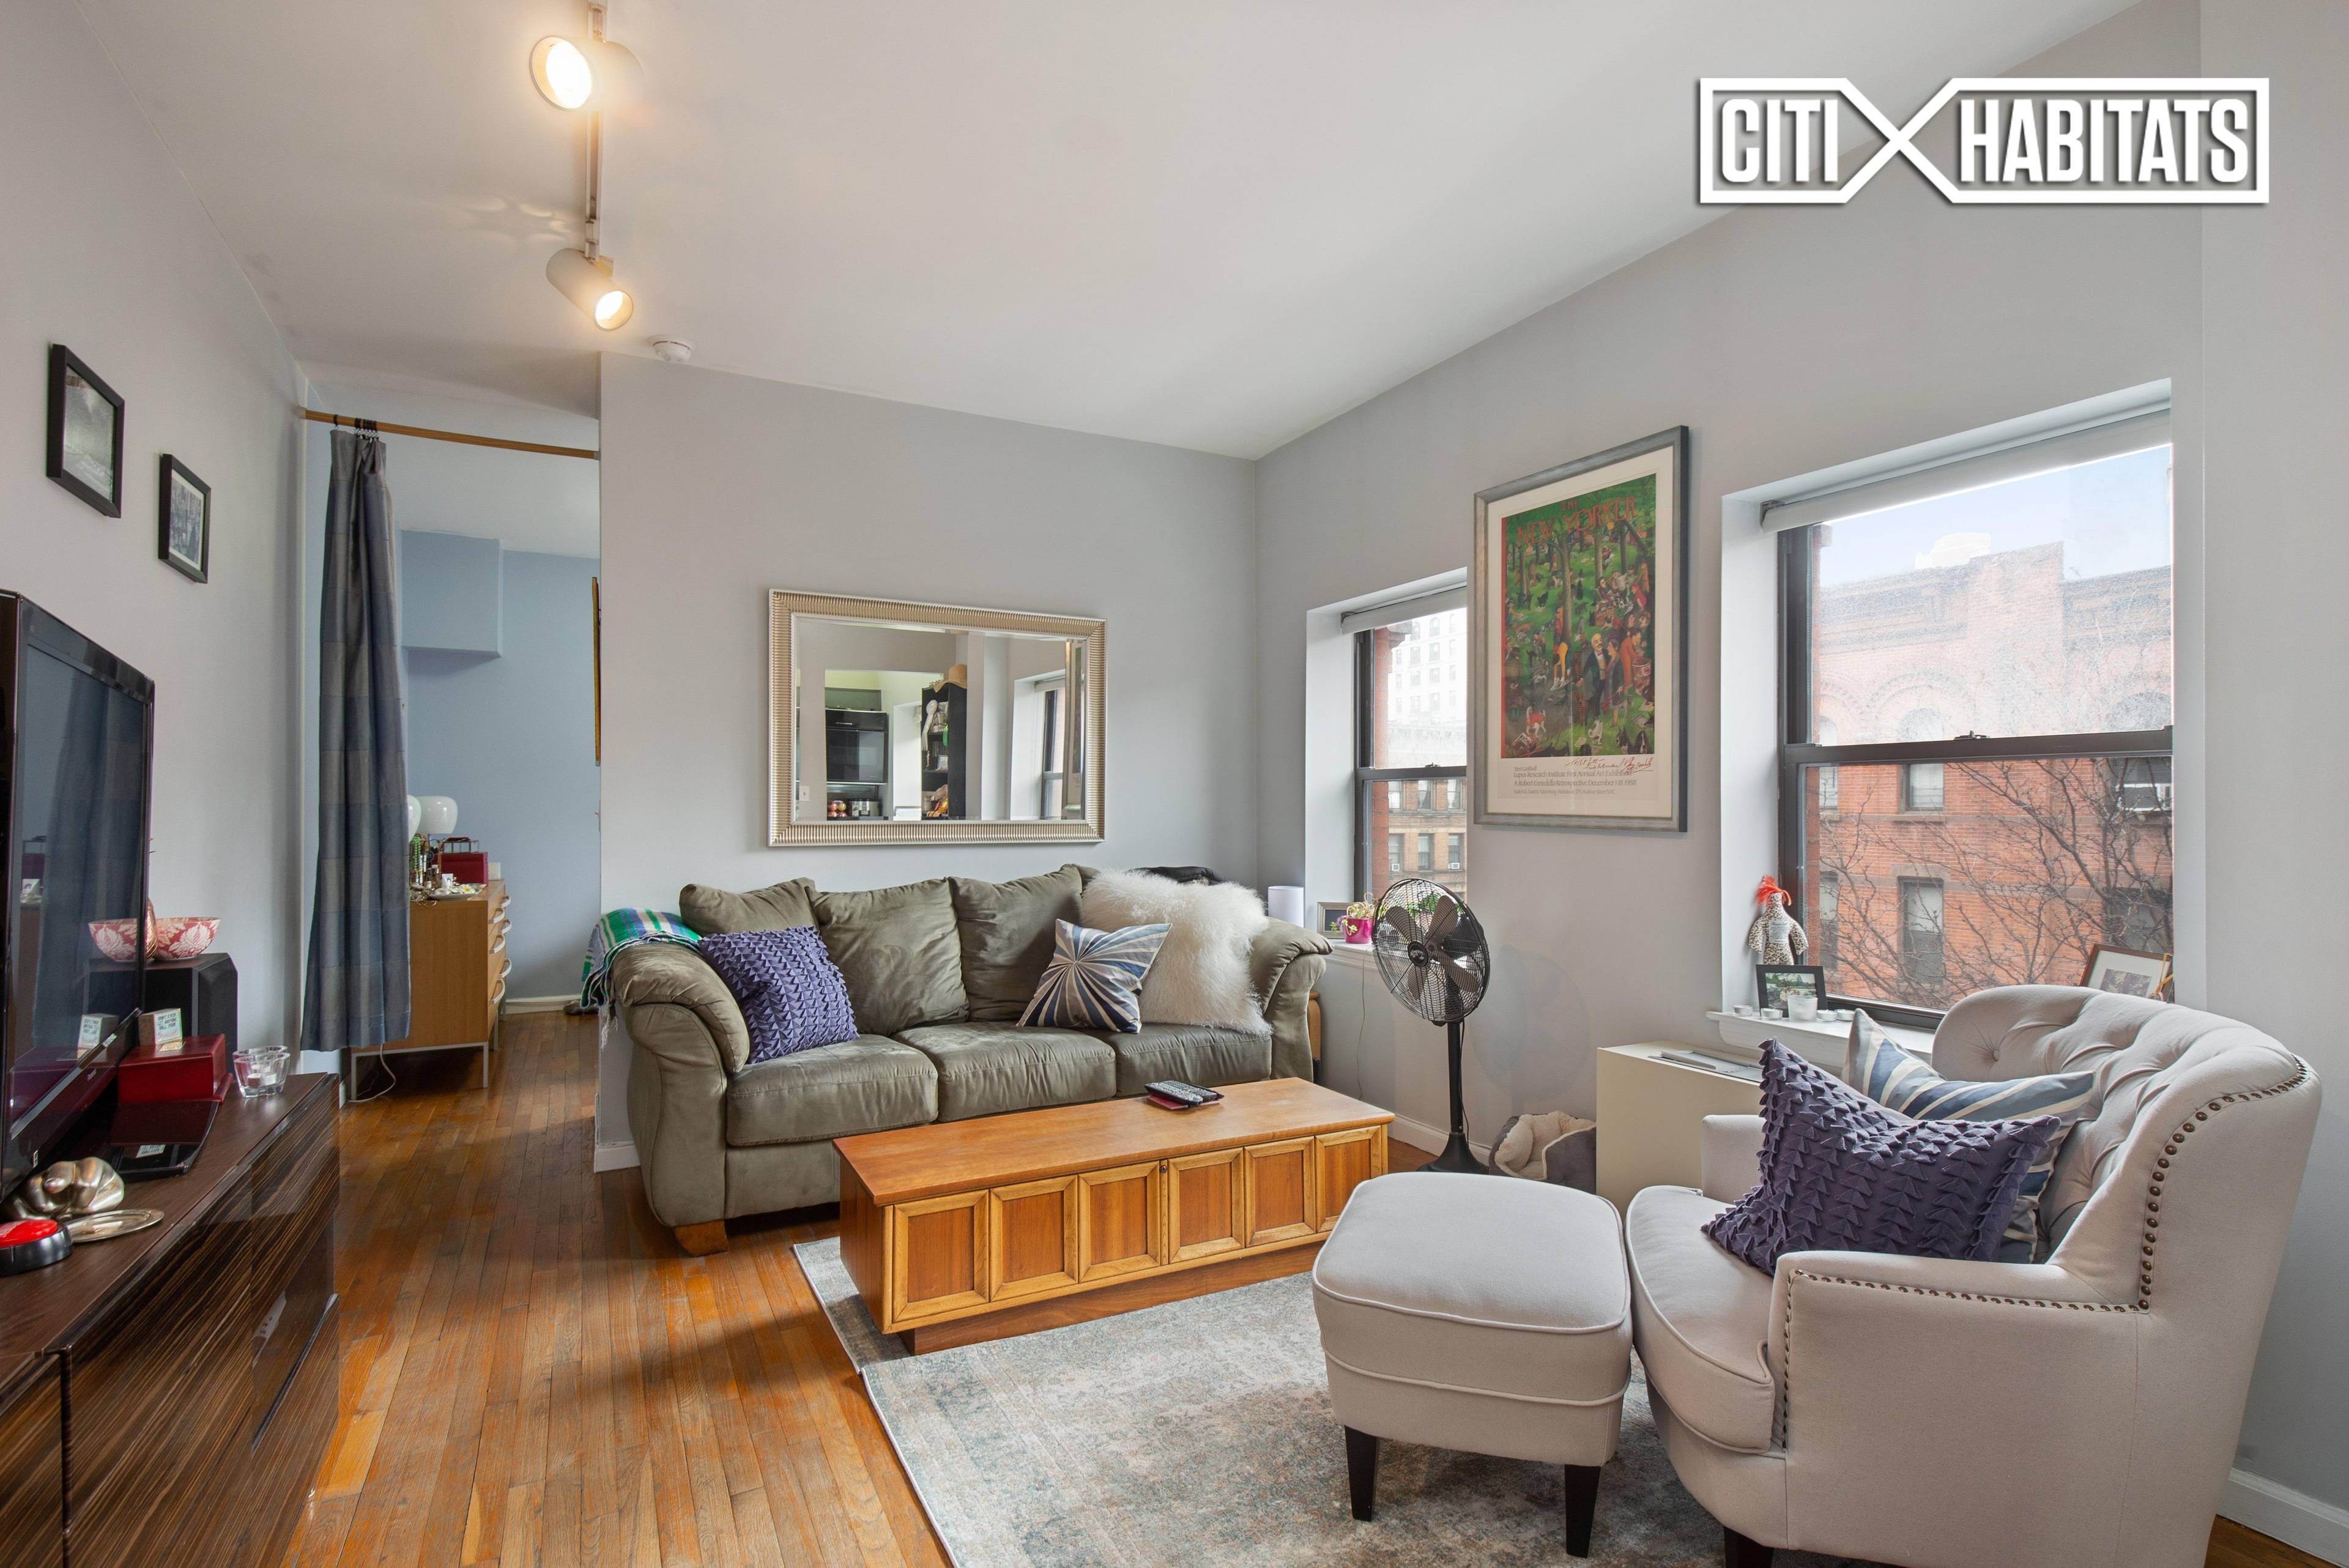 This sunny one bedroom is located in a doorman building known as The Chesterfield, sitting on the corner of West 80th Street and Amsterdam Avenue.